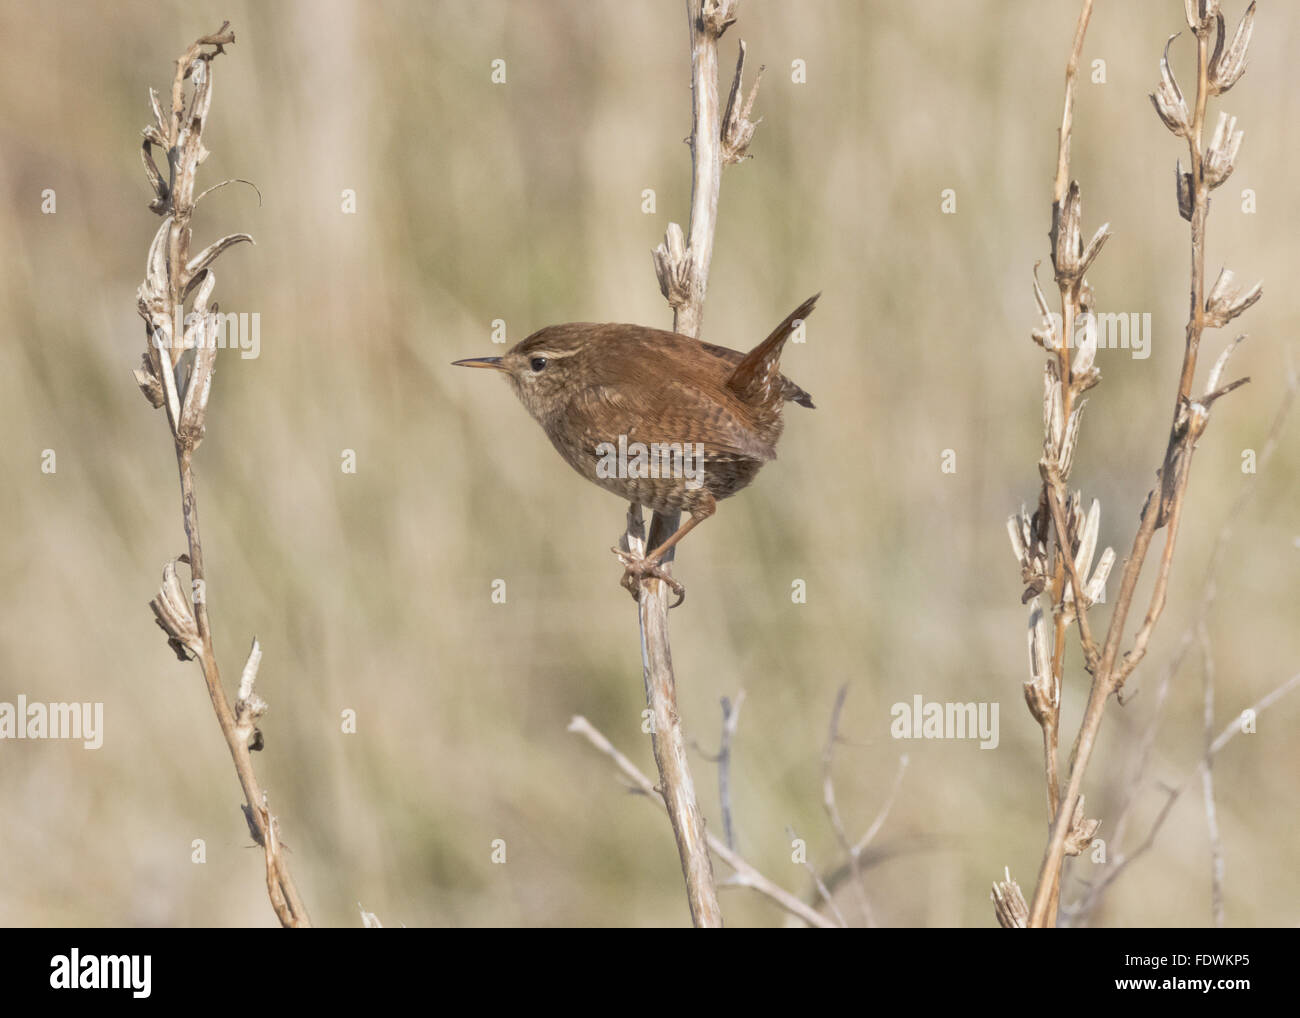 Wren in coastal scrub, Gillfoot Bay, near Southerness lighthouse, Dumfries and Galloway, Scotland, UK Stock Photo